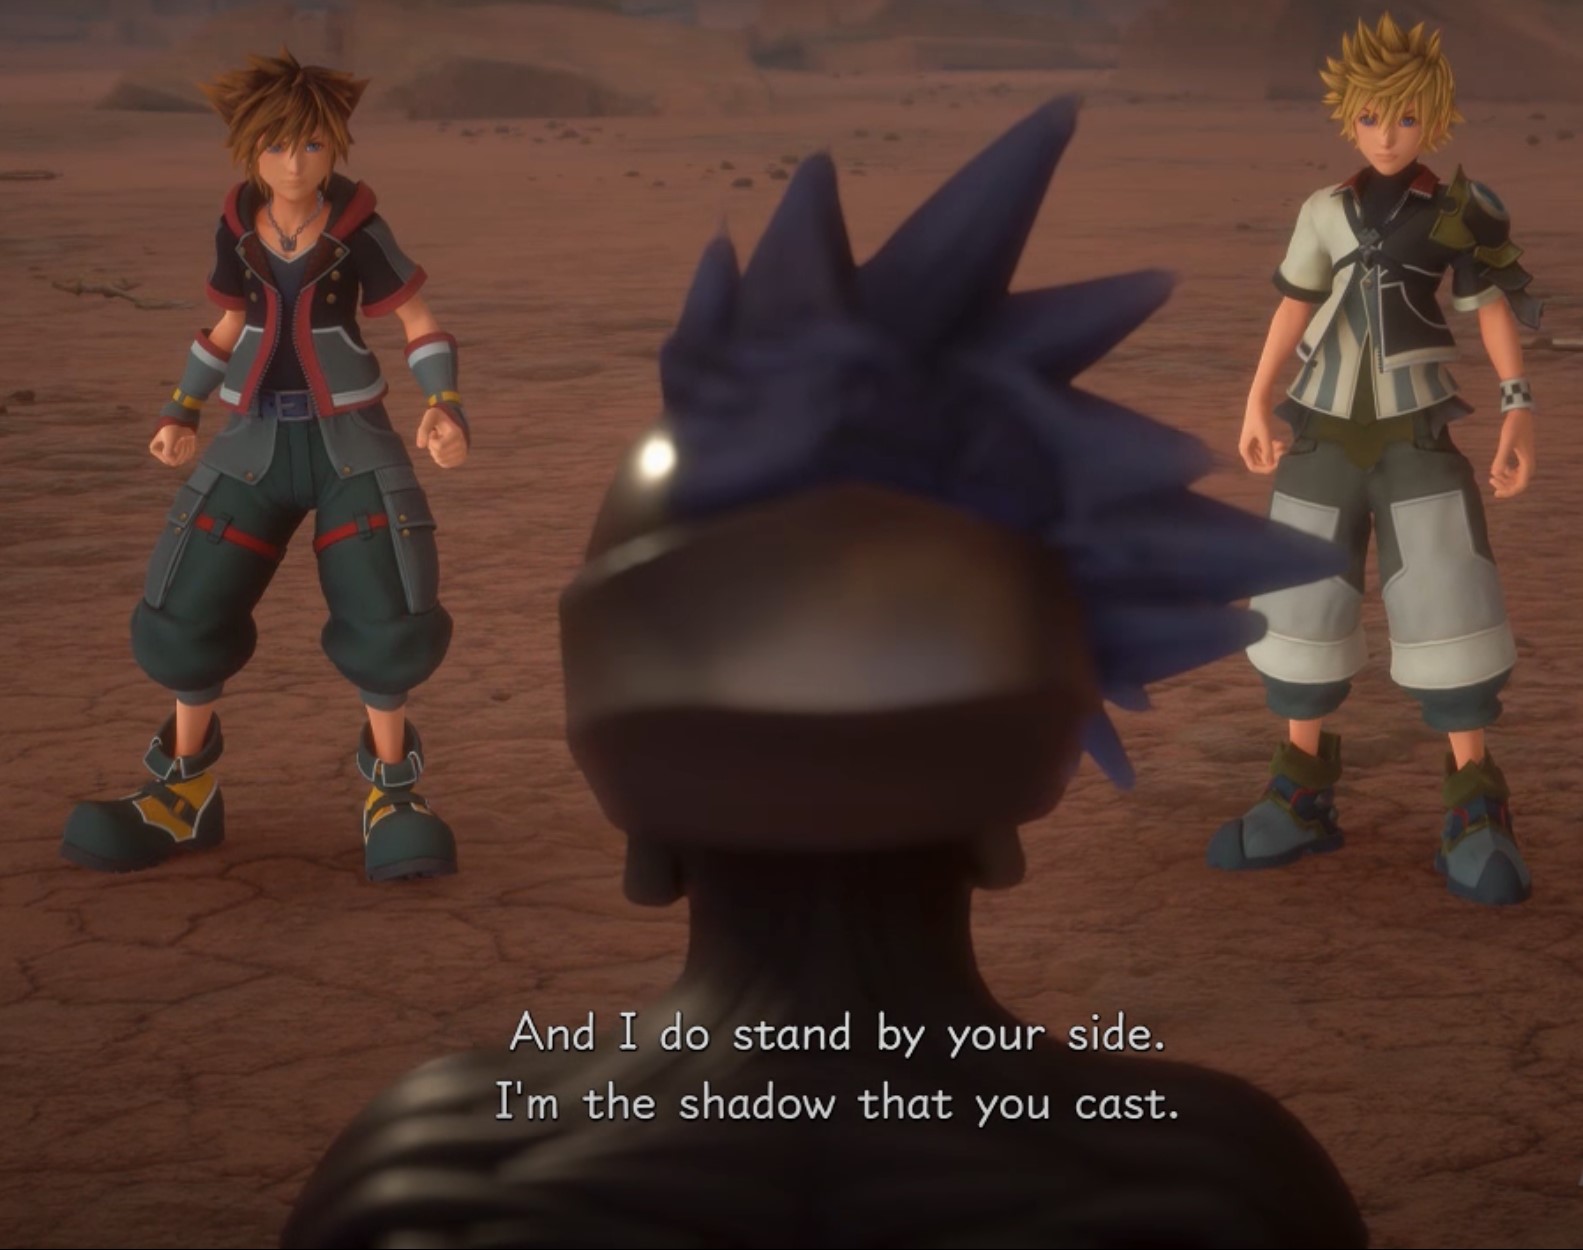 Vanitas telling Sora and Ventus that he is the shadow that they cast